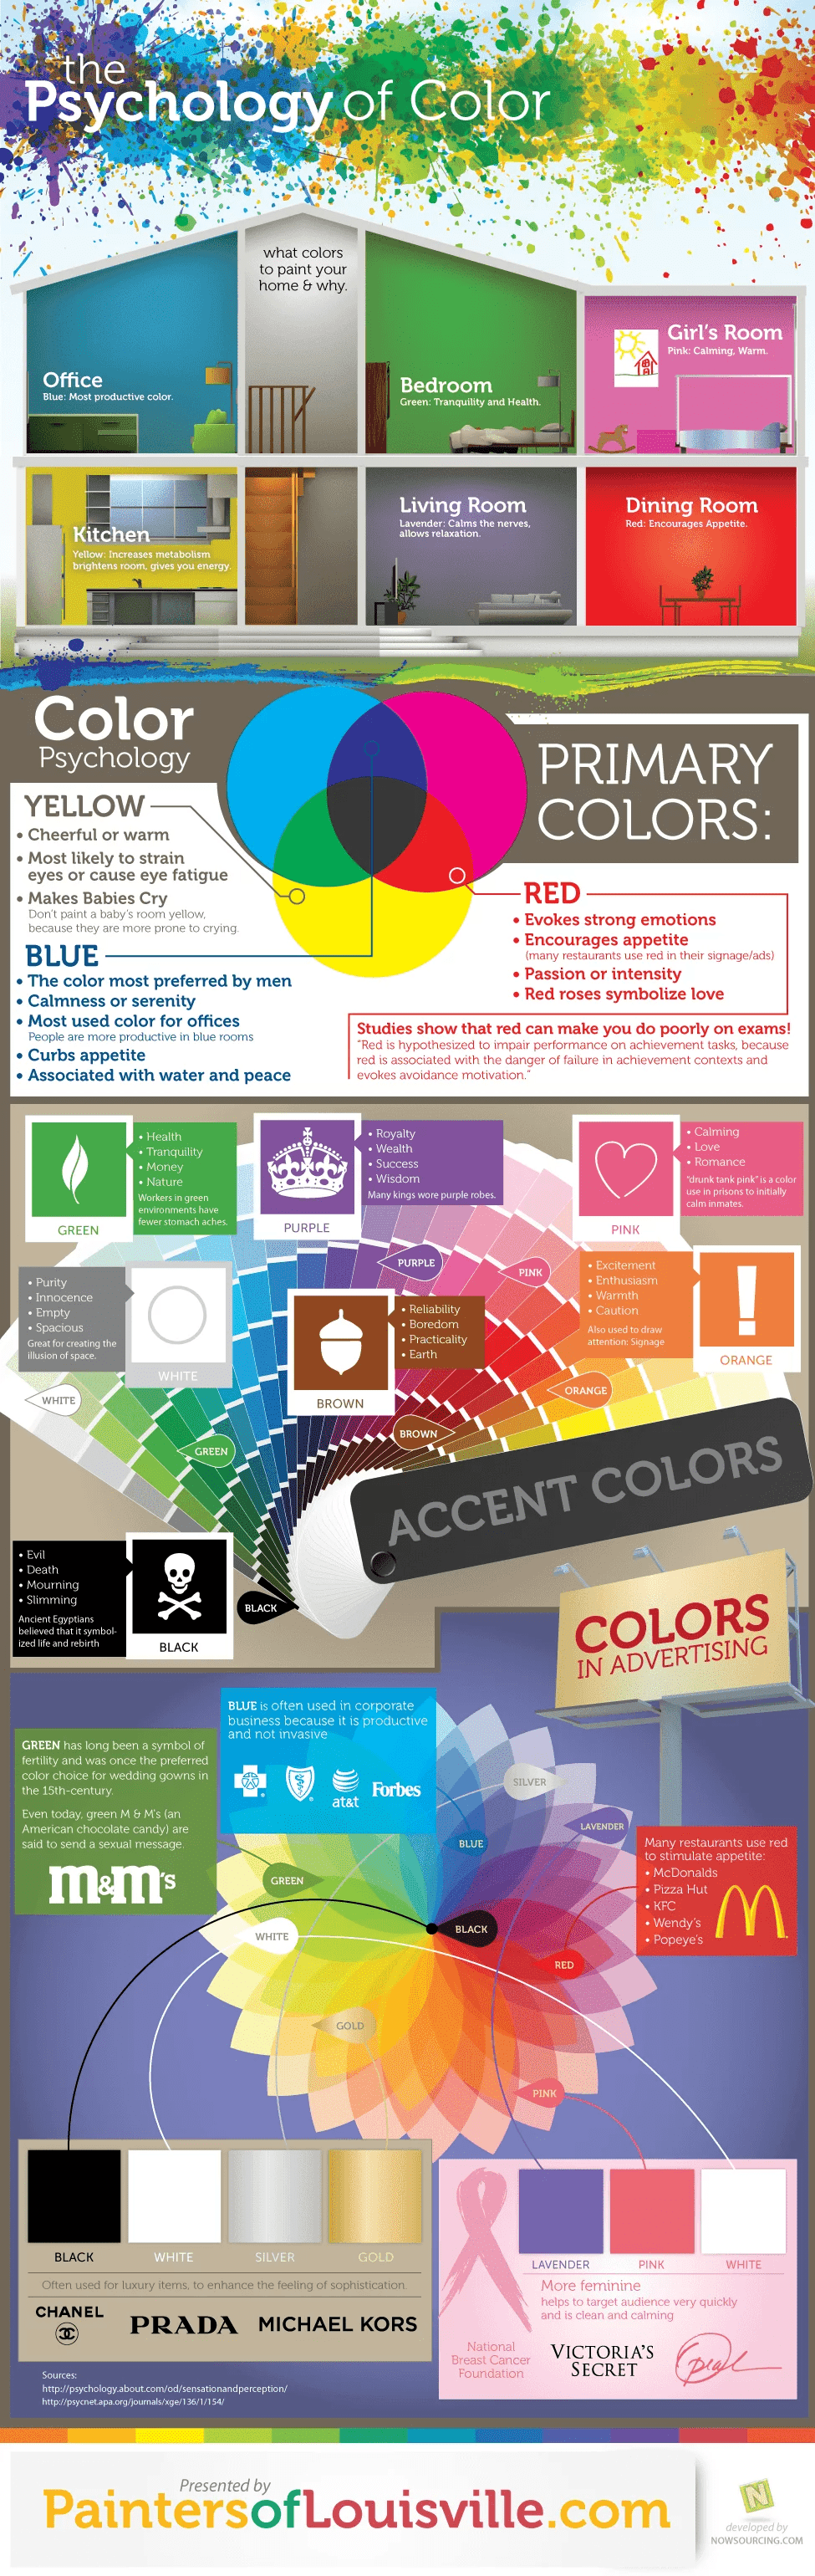 Pyshology of Color Infographic